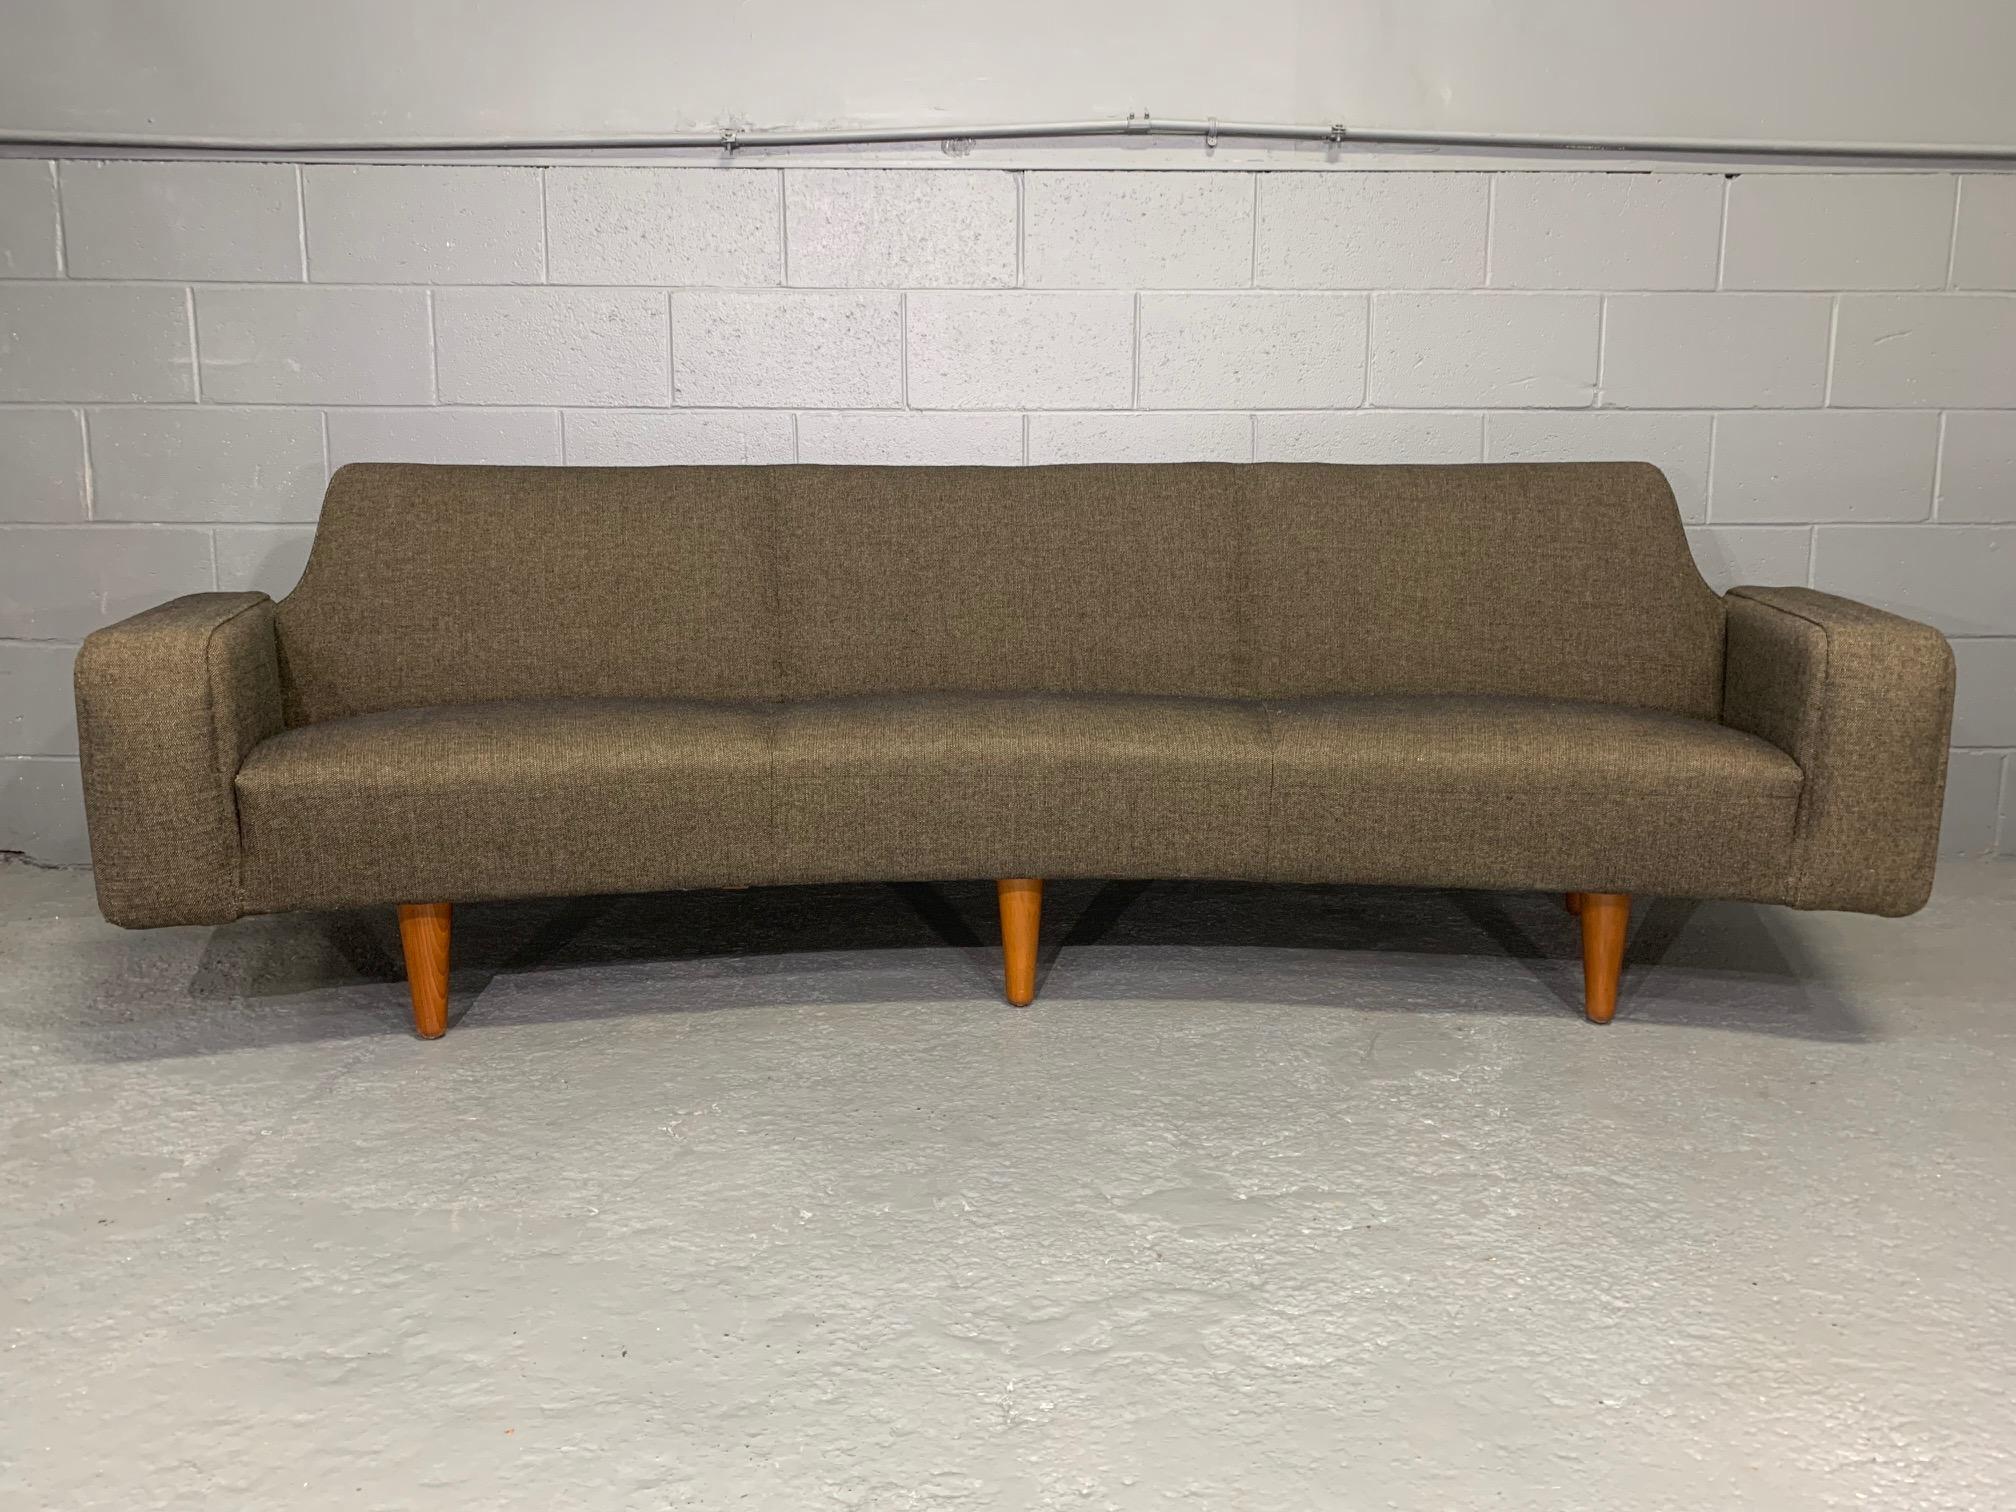 Amazing Danish modern midcentury Model 450 banana curved sofa by Illum Wikkelsø for Aarhus Polstrermøbelfabrik in classic brown/black tweed upholstery. Sofa and upholstery in excellent condition with minor wear on fabric in front left lower corner